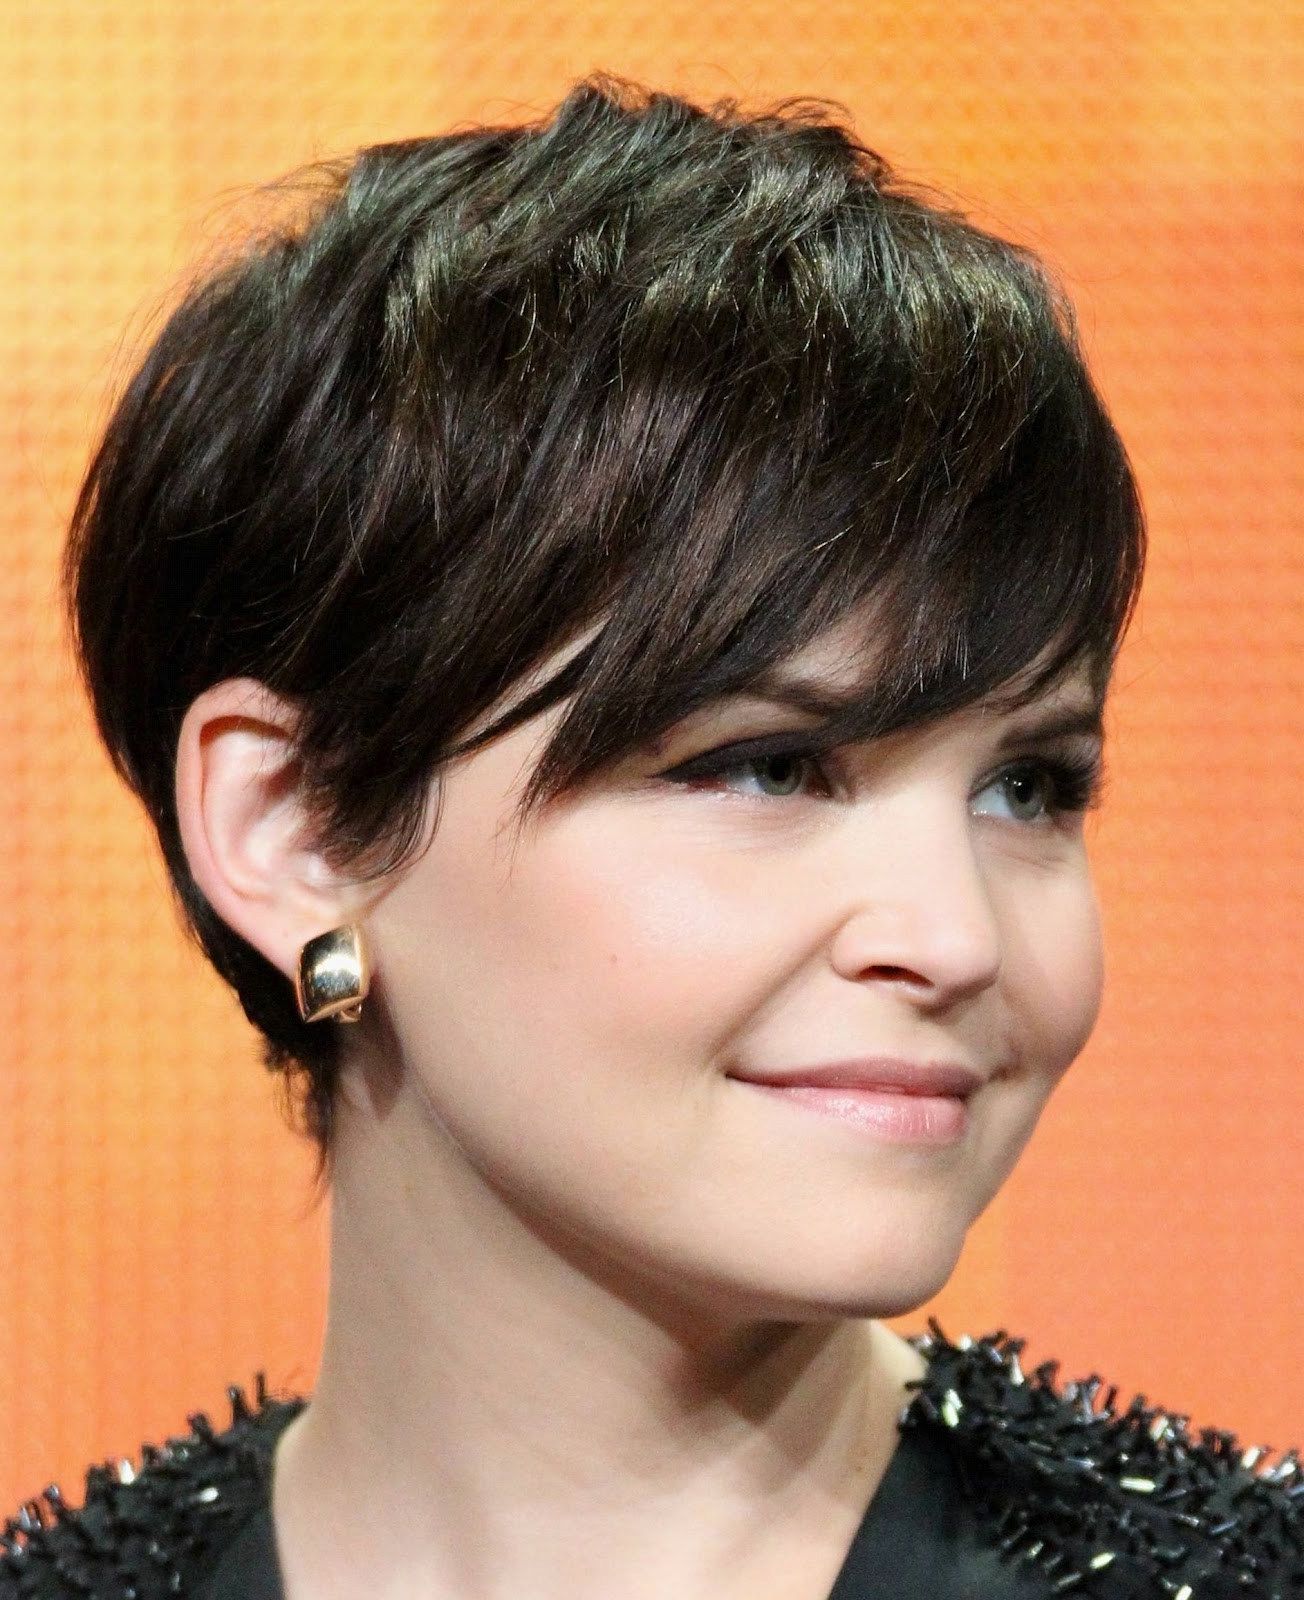 20 Stunning Looks With Pixie Cut For Round Face | Pixie Cut With Regard To Most Recent Cute Pixie Hairstyles For Round Faces (View 12 of 15)